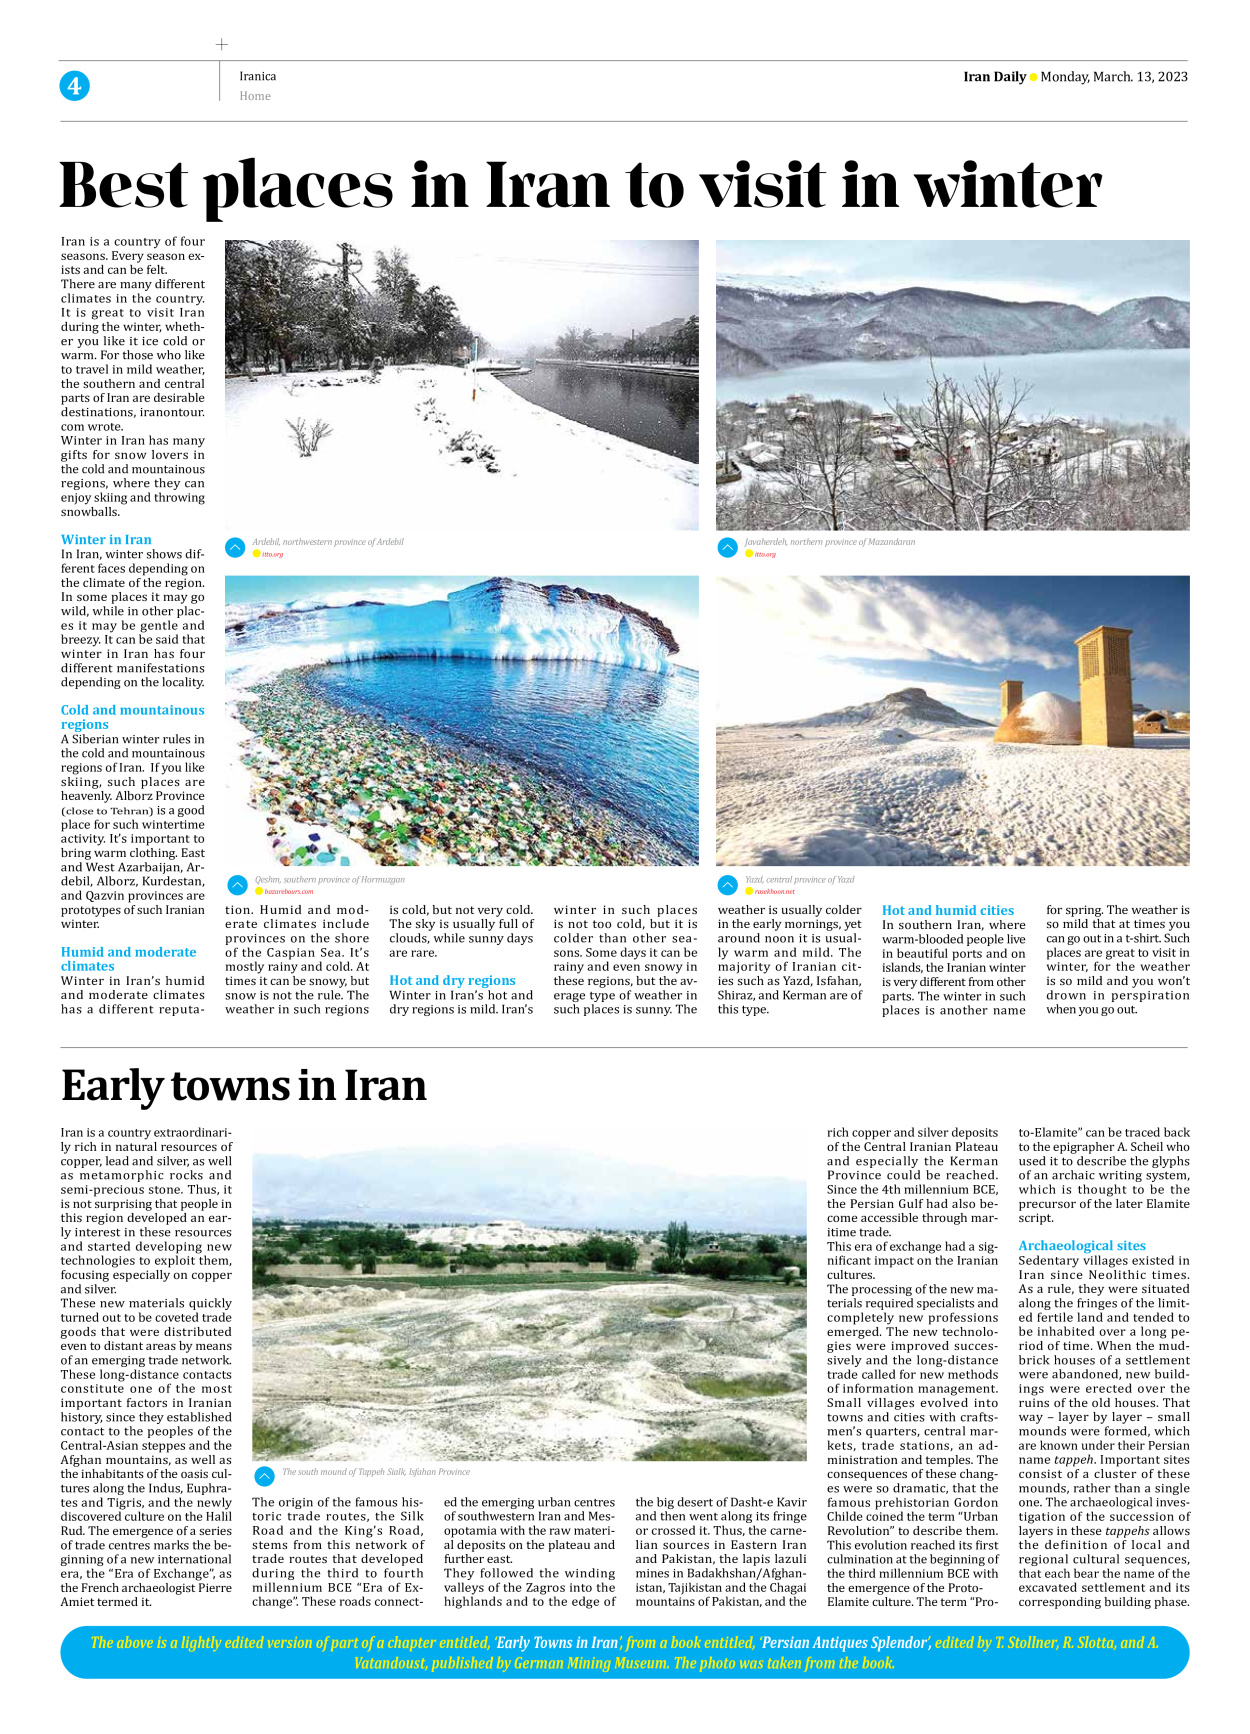 Iran Daily - Number Seven Thousand Two Hundred and Fifty Six - 13 March 2023 - Page 4